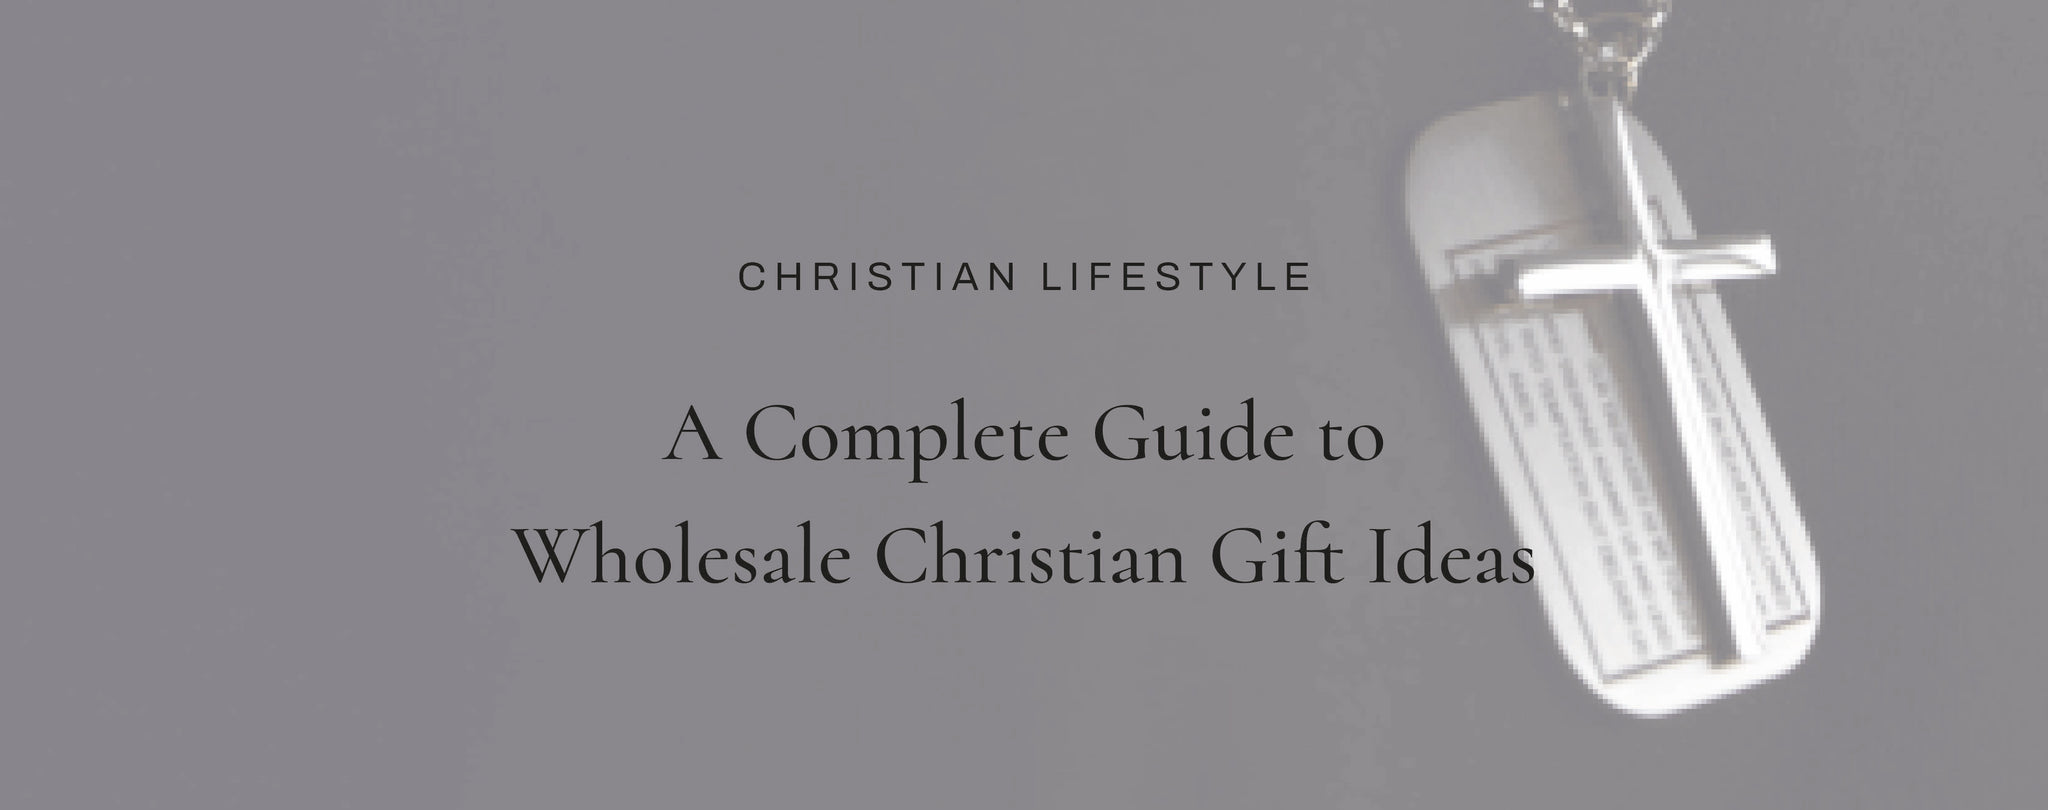 A Complete Guide to Wholesale Christian Gift Ideas